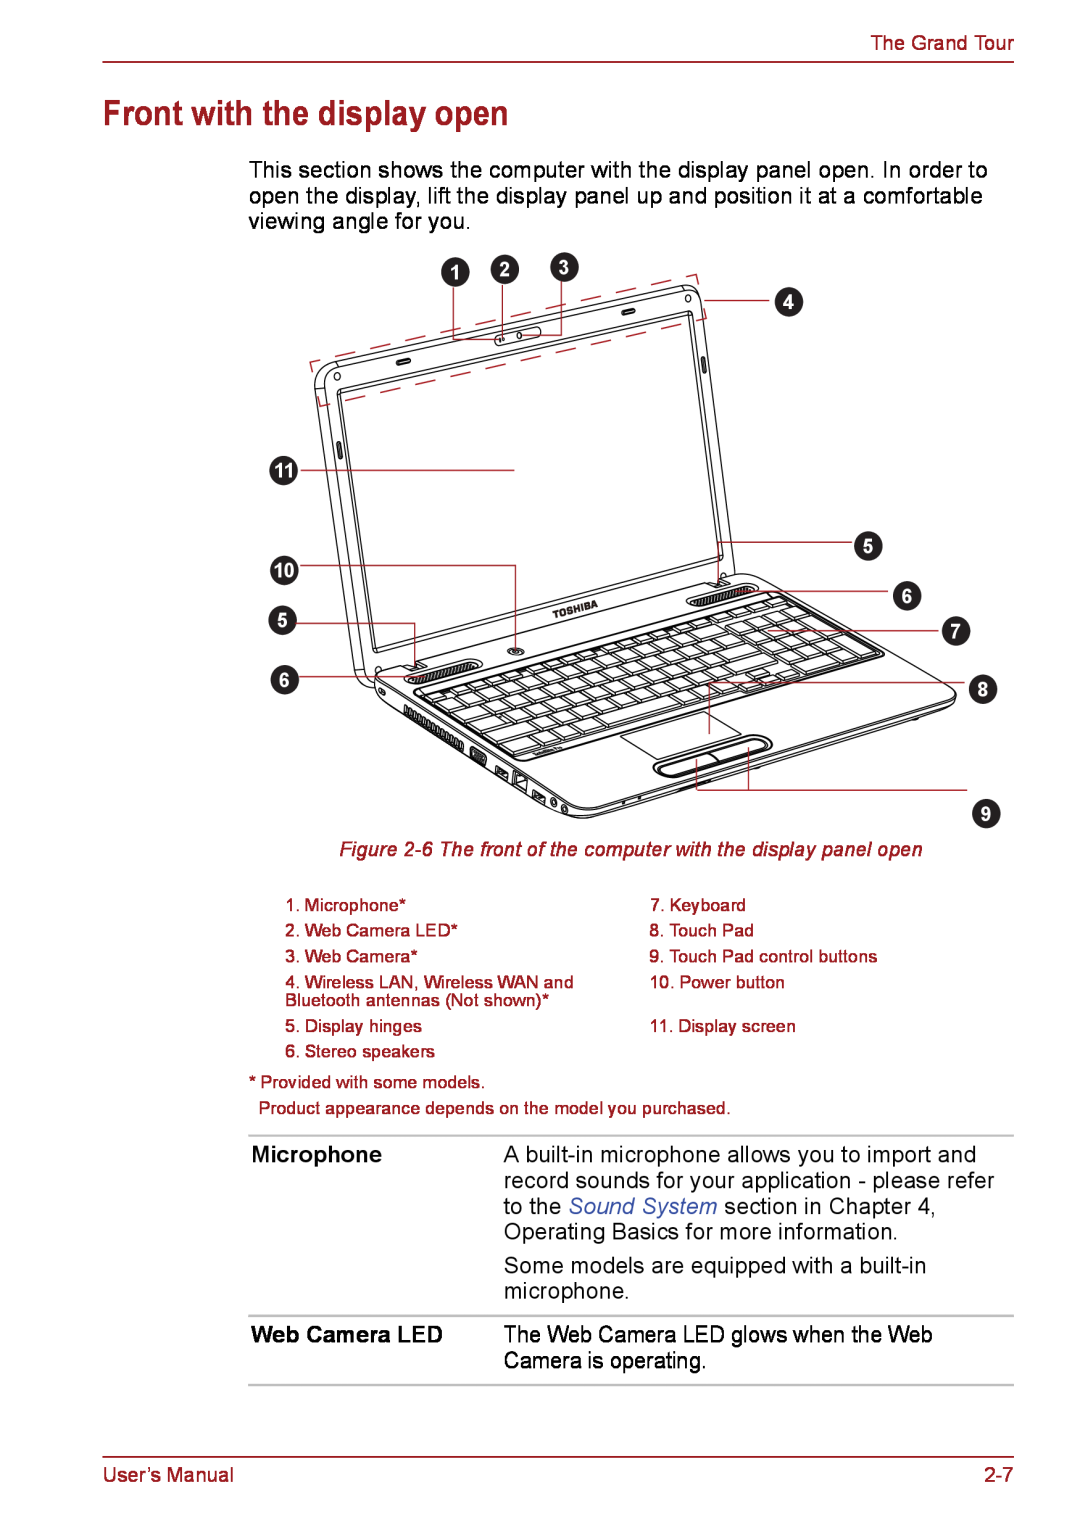 Toshiba PSC08U-02D01D user manual Front with the display open, Microphone, Web Camera LED 